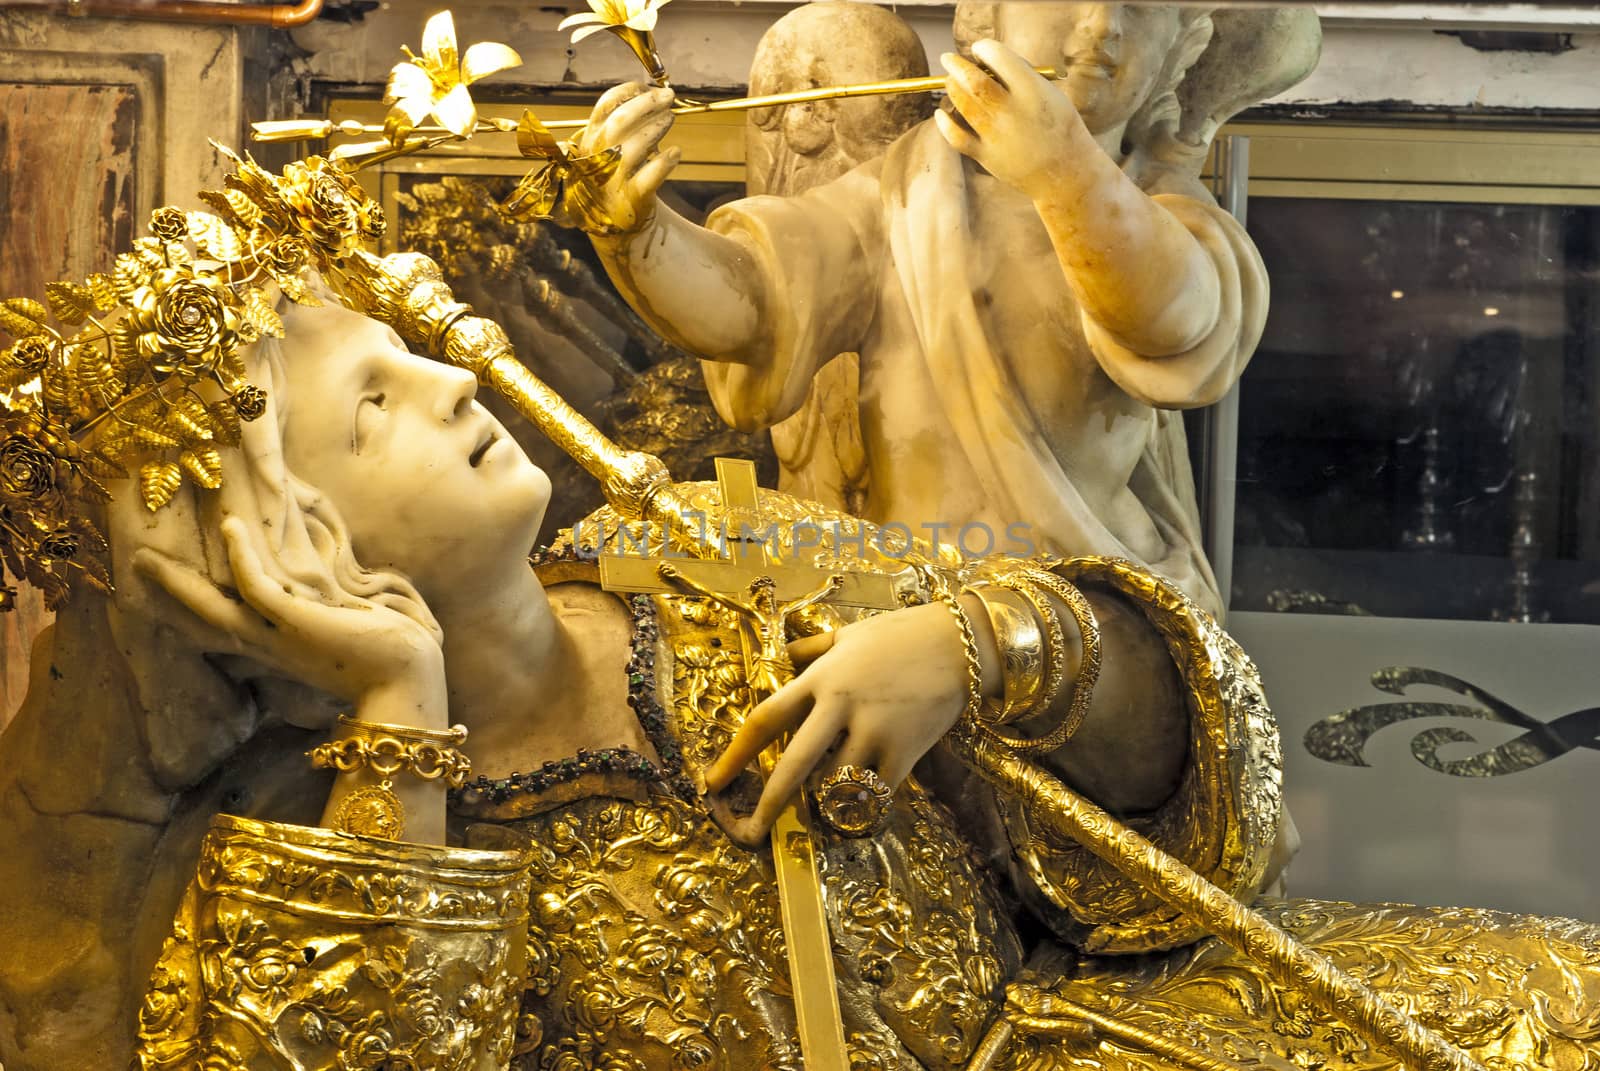 PALERMO, APRIL, 10 - Golden Saint Rosalie in The sanctuary of Santa Rosalia "Santuzza", attracts thousands of visitors every day on April, 10, 2013 in Palermo. Sicily